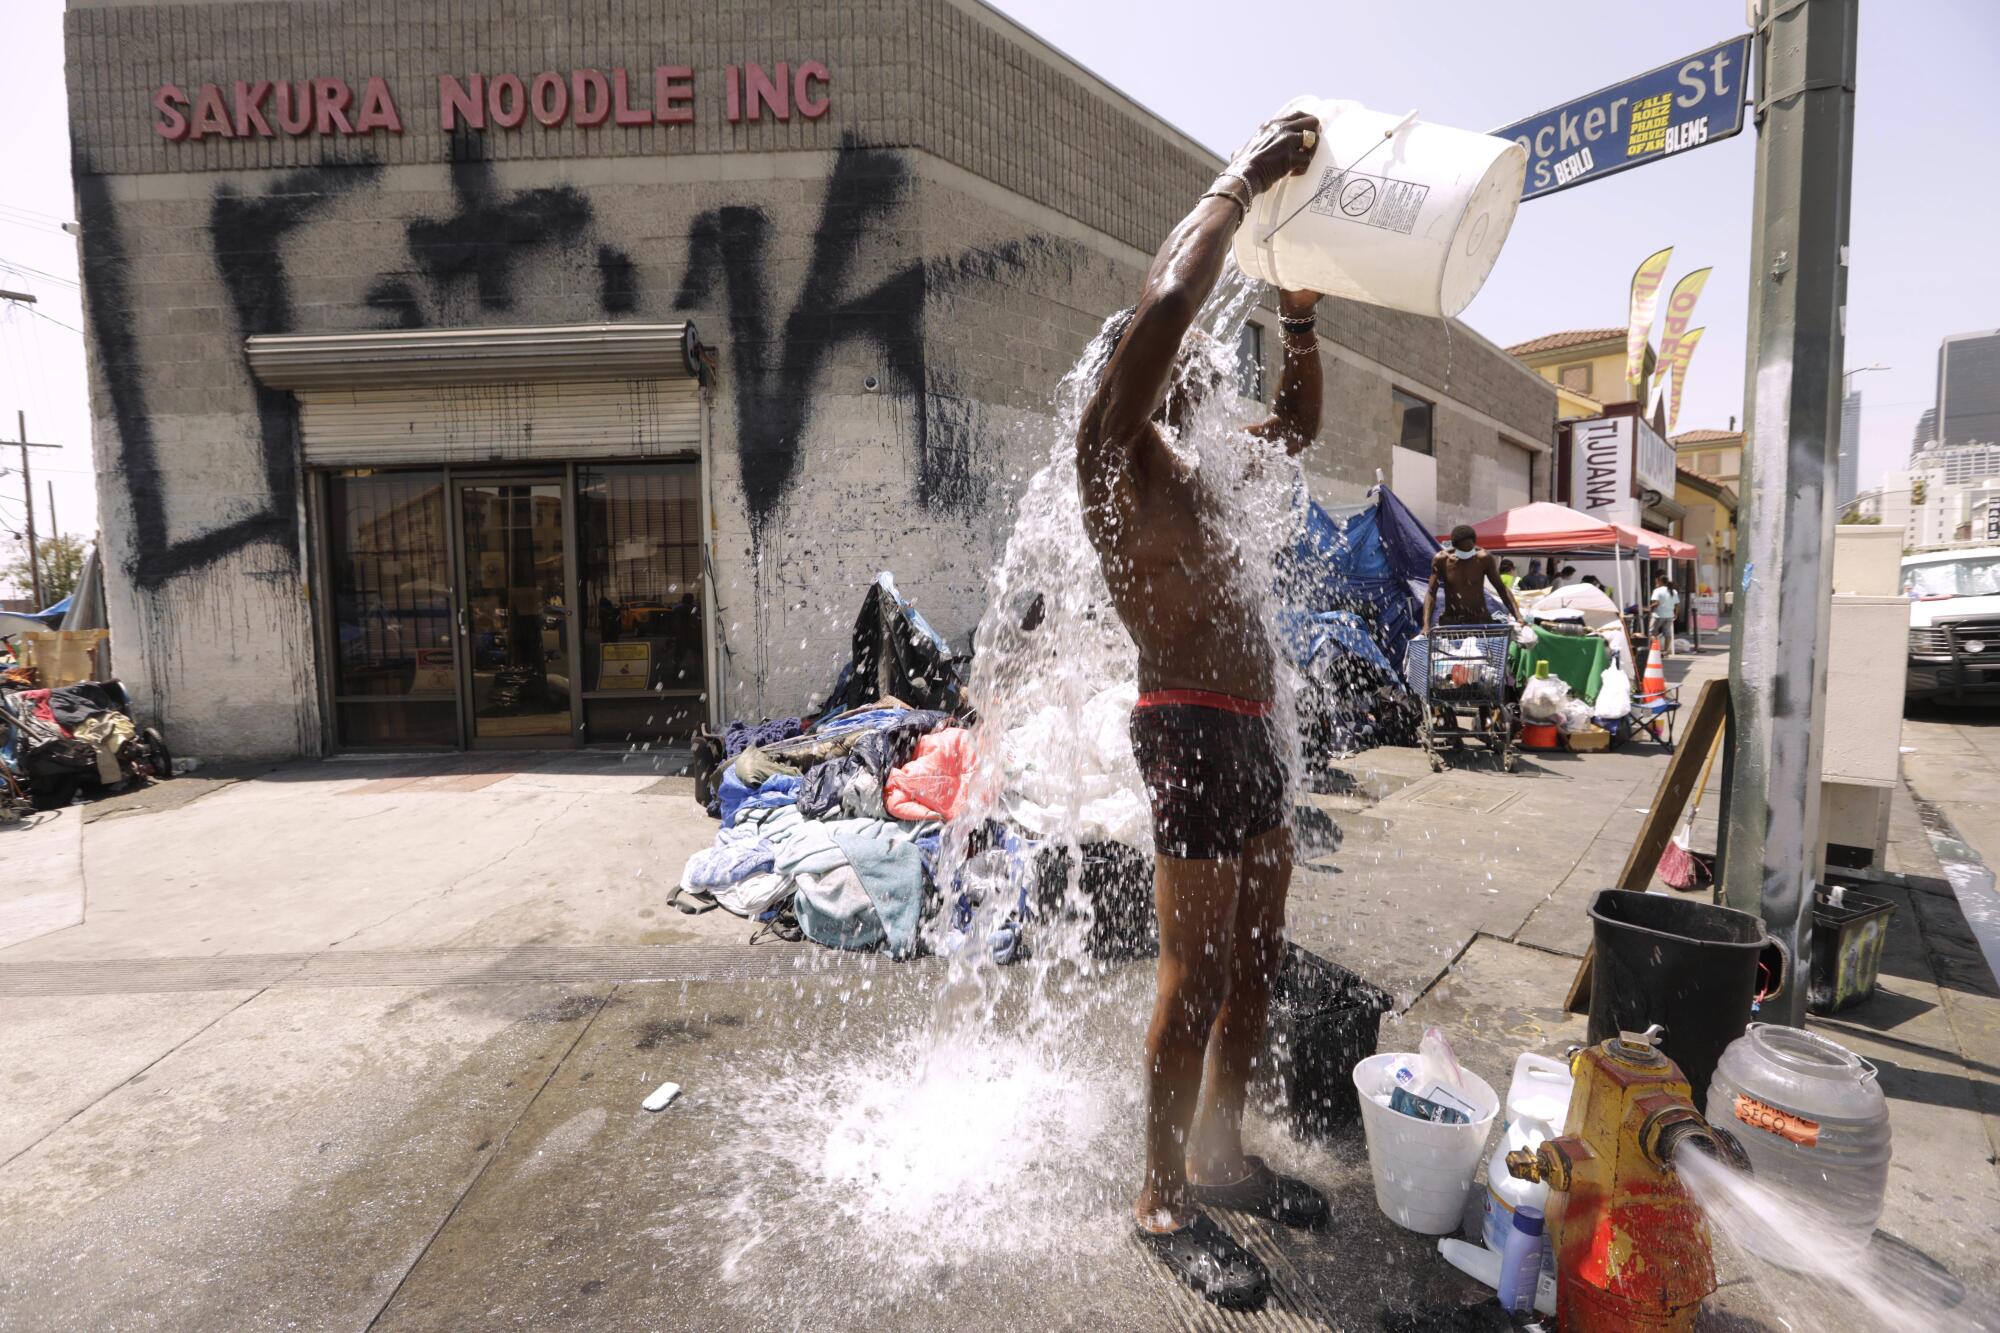 A man in trunks seeking relief from the heat dumps a bucket of water over himself